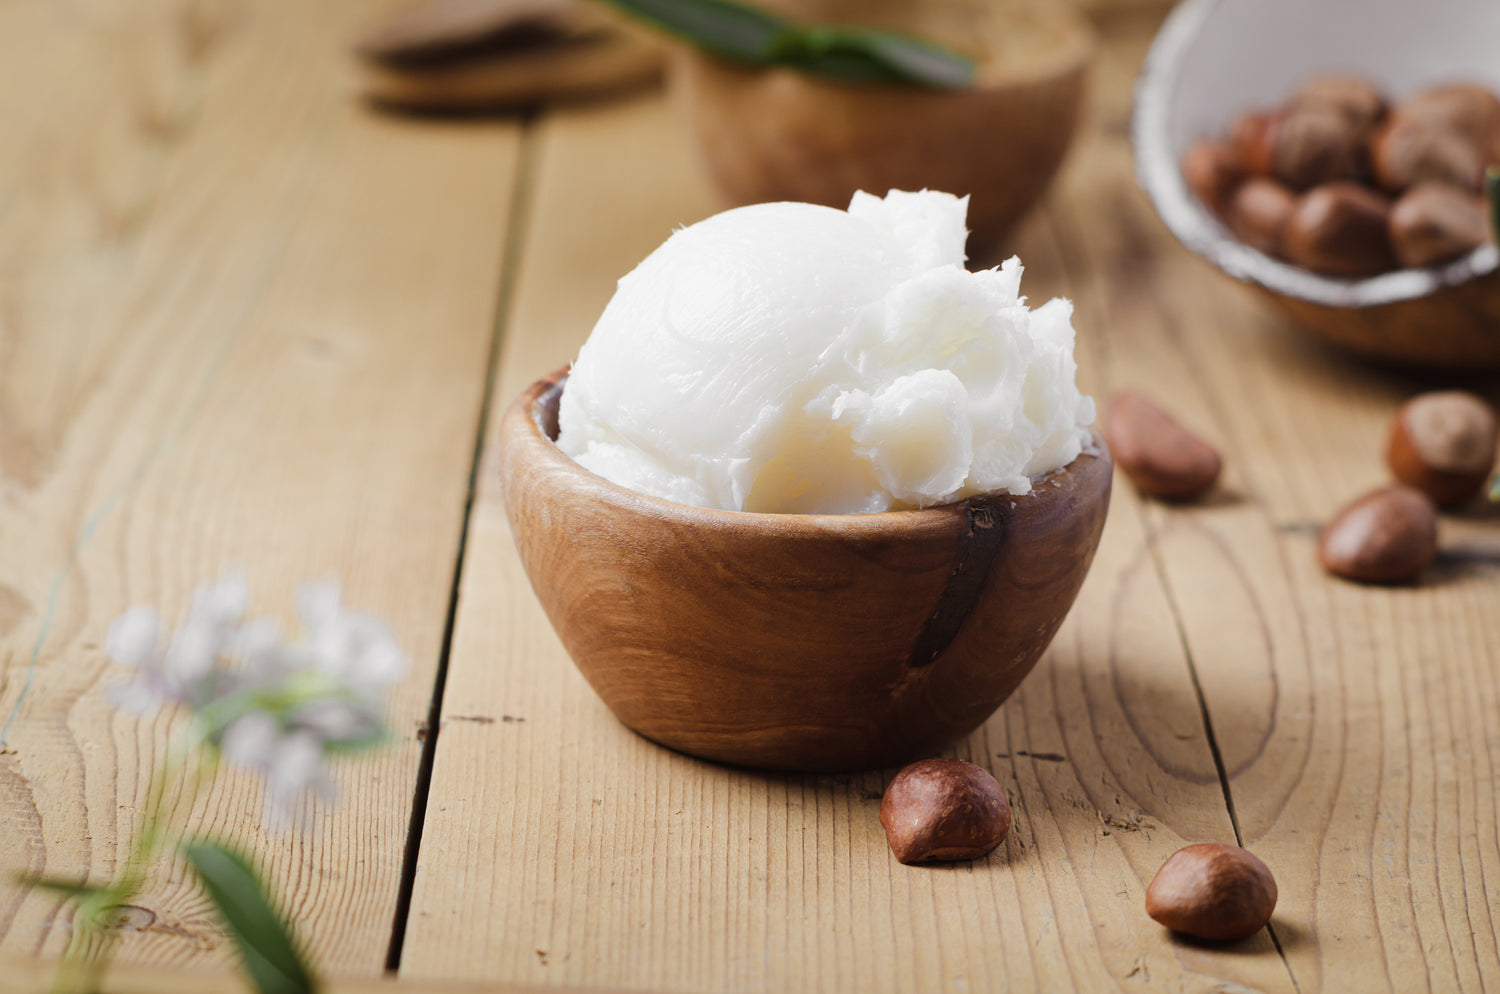 Creamy butter in wooden bowl with shea nuts on wooden background